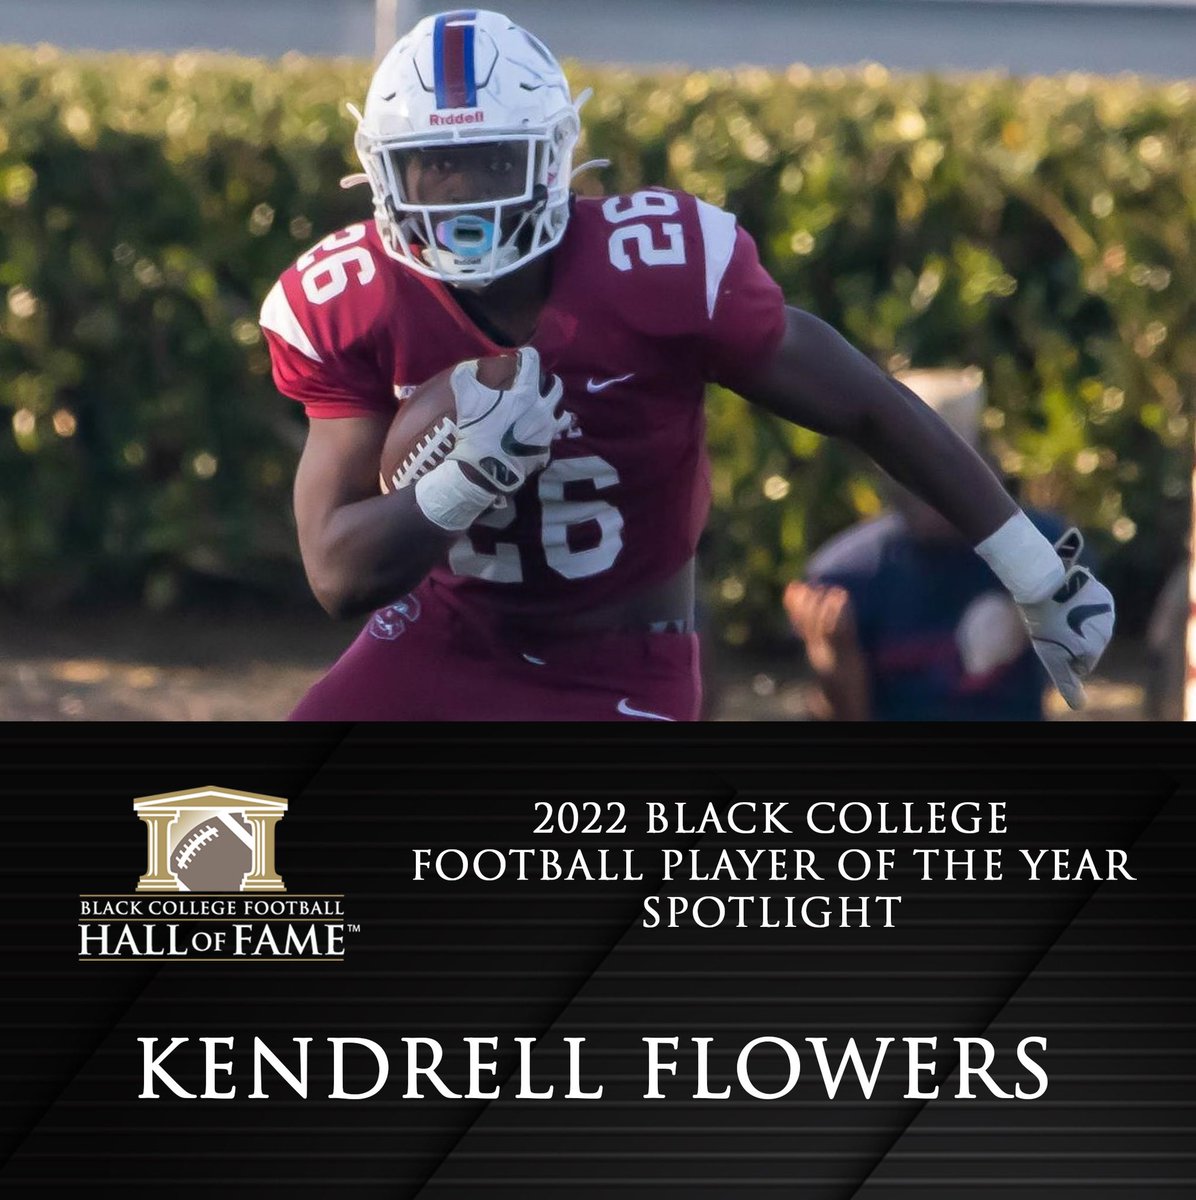 Black College Football Player of the Year Spotlight: @SCState_Fb RB Kendrell Flowers rushed for 153 yards and 2 TDs in the Bulldogs win over Bethune-Cookman